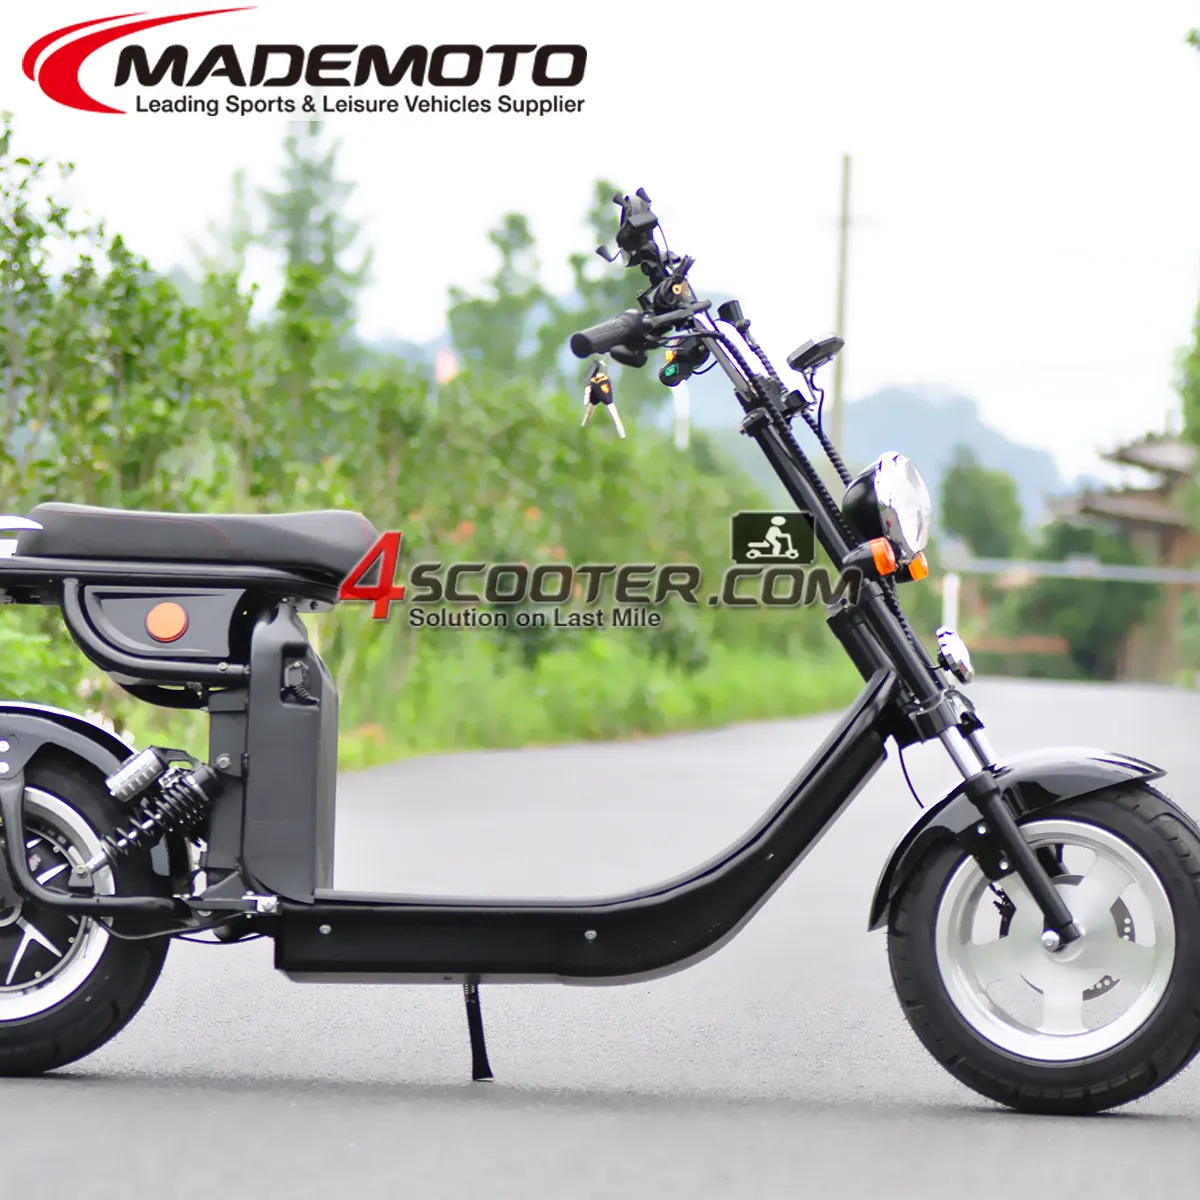 Source swing electric scooter swagtron swagger EEC COC Citycoco on m.alibaba.com